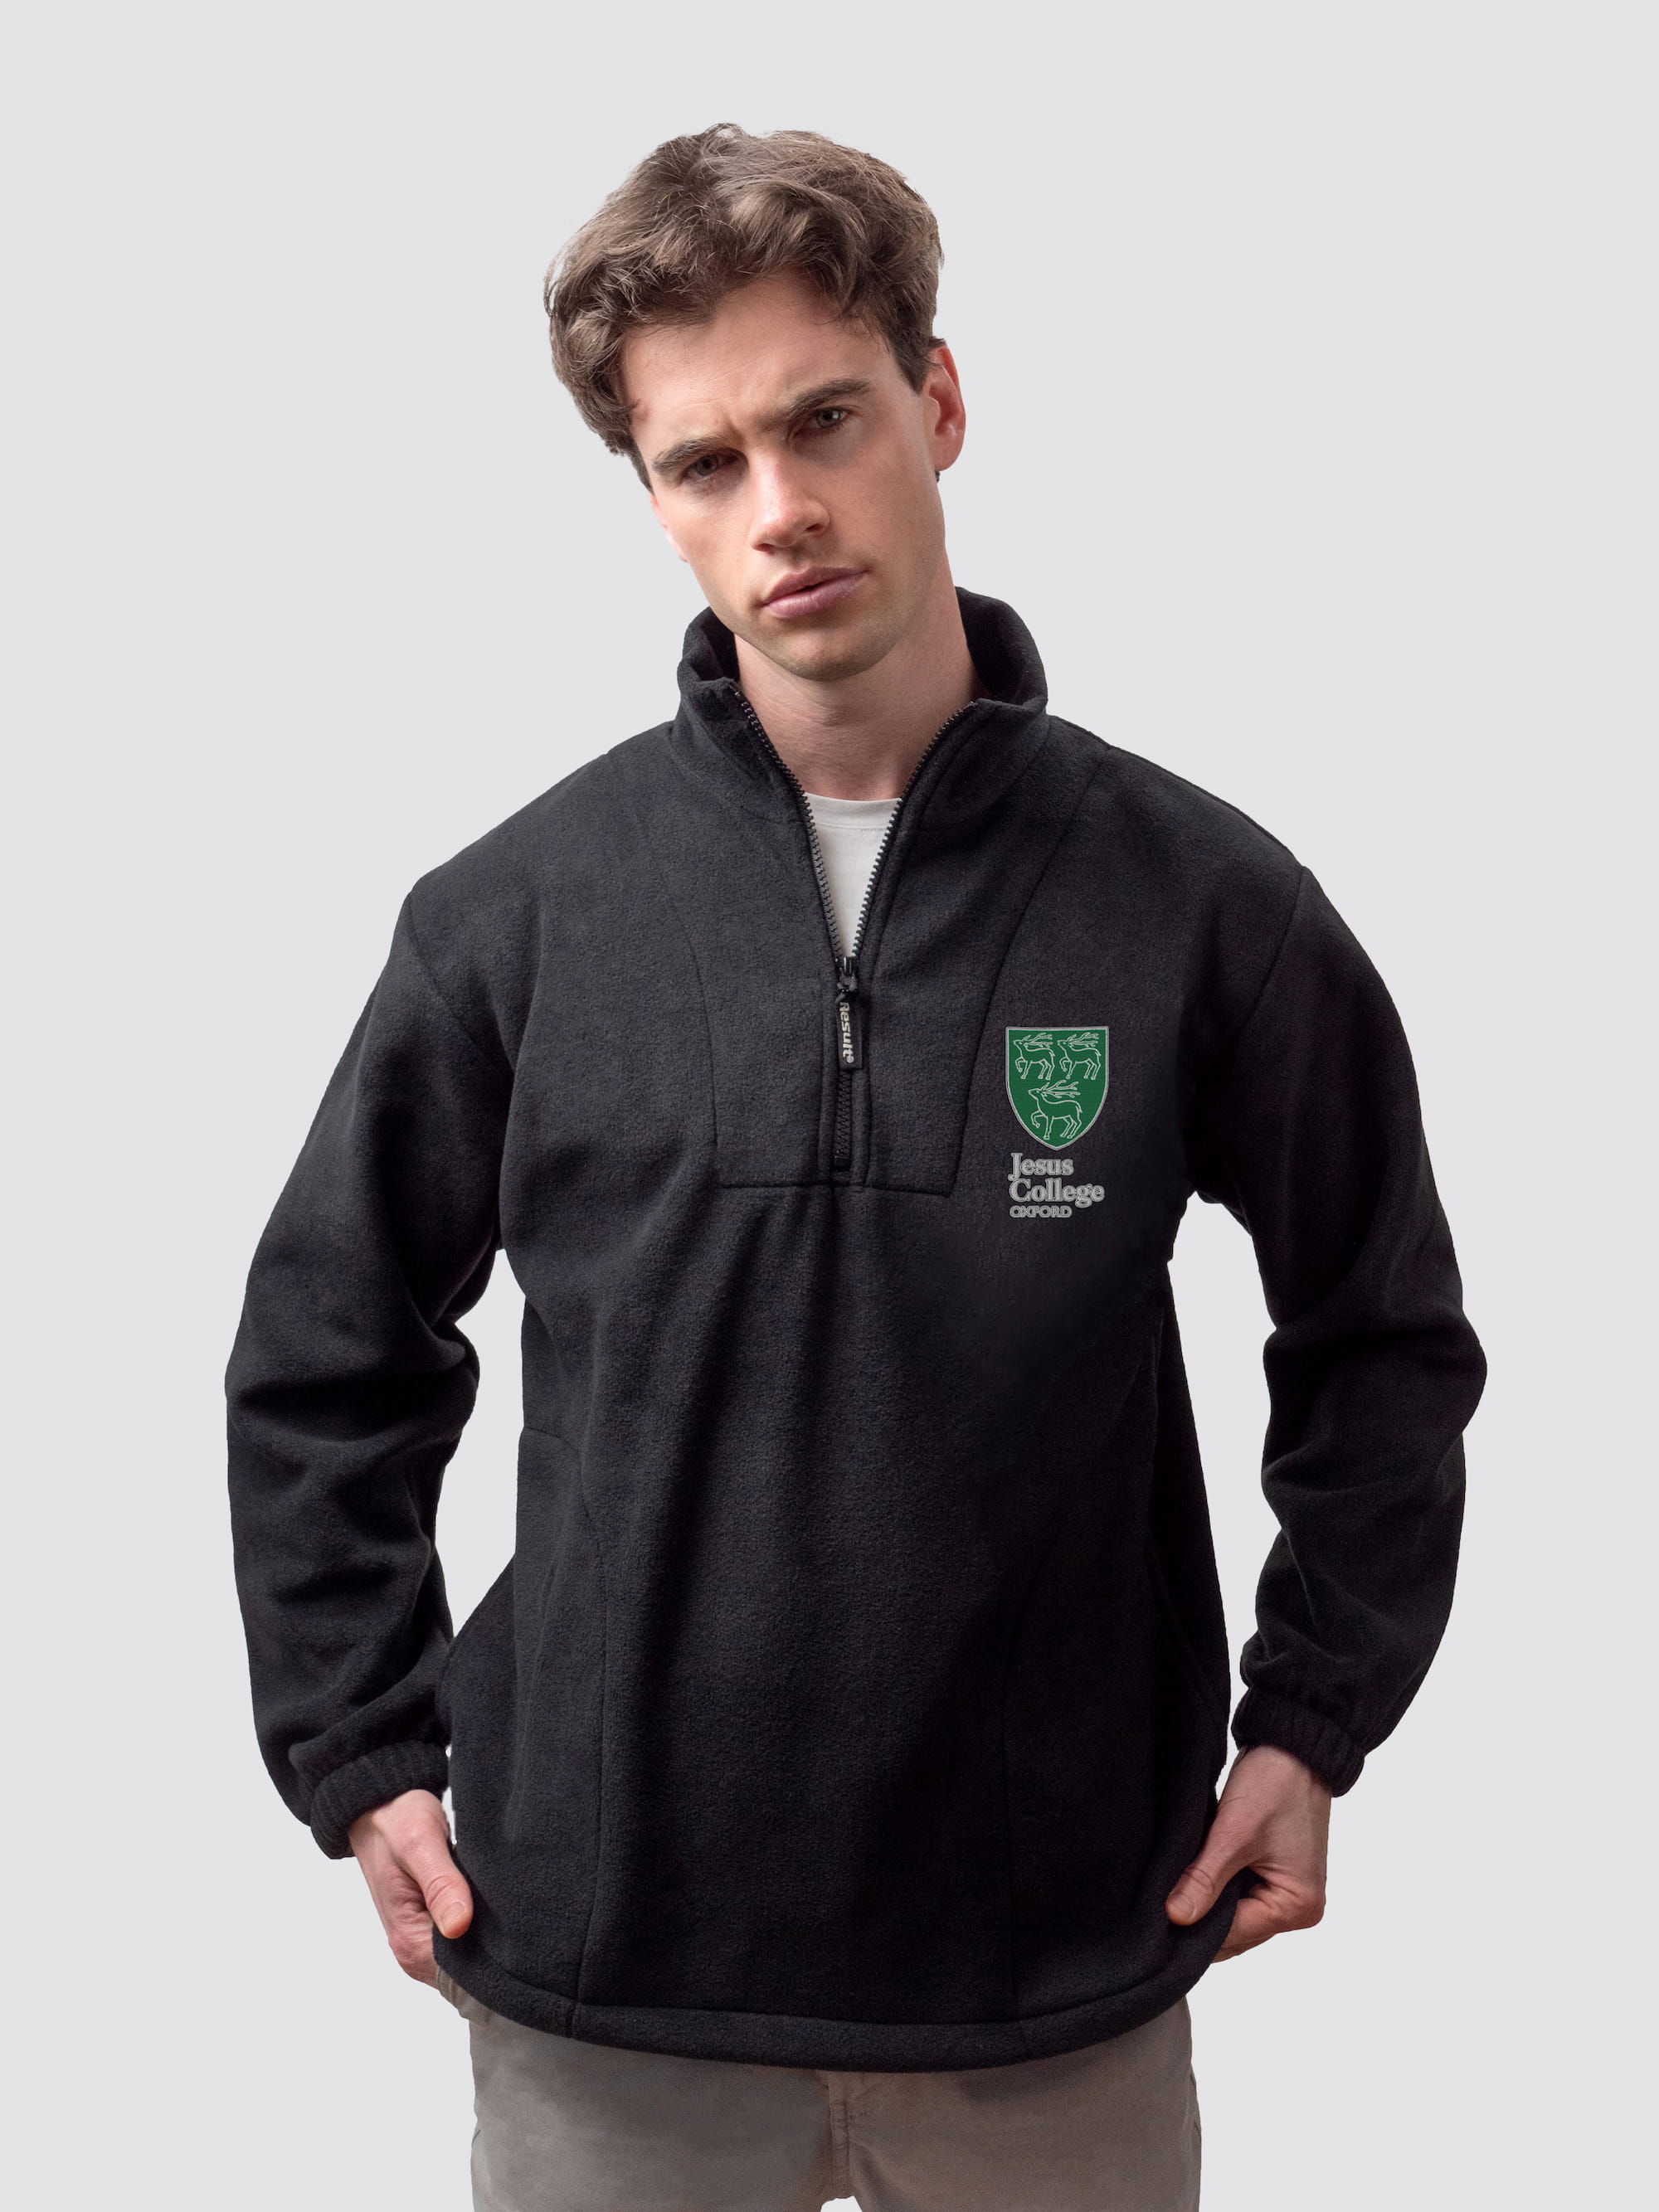 Oxford university fleece, with custom embroidered initials and Jesus College crest